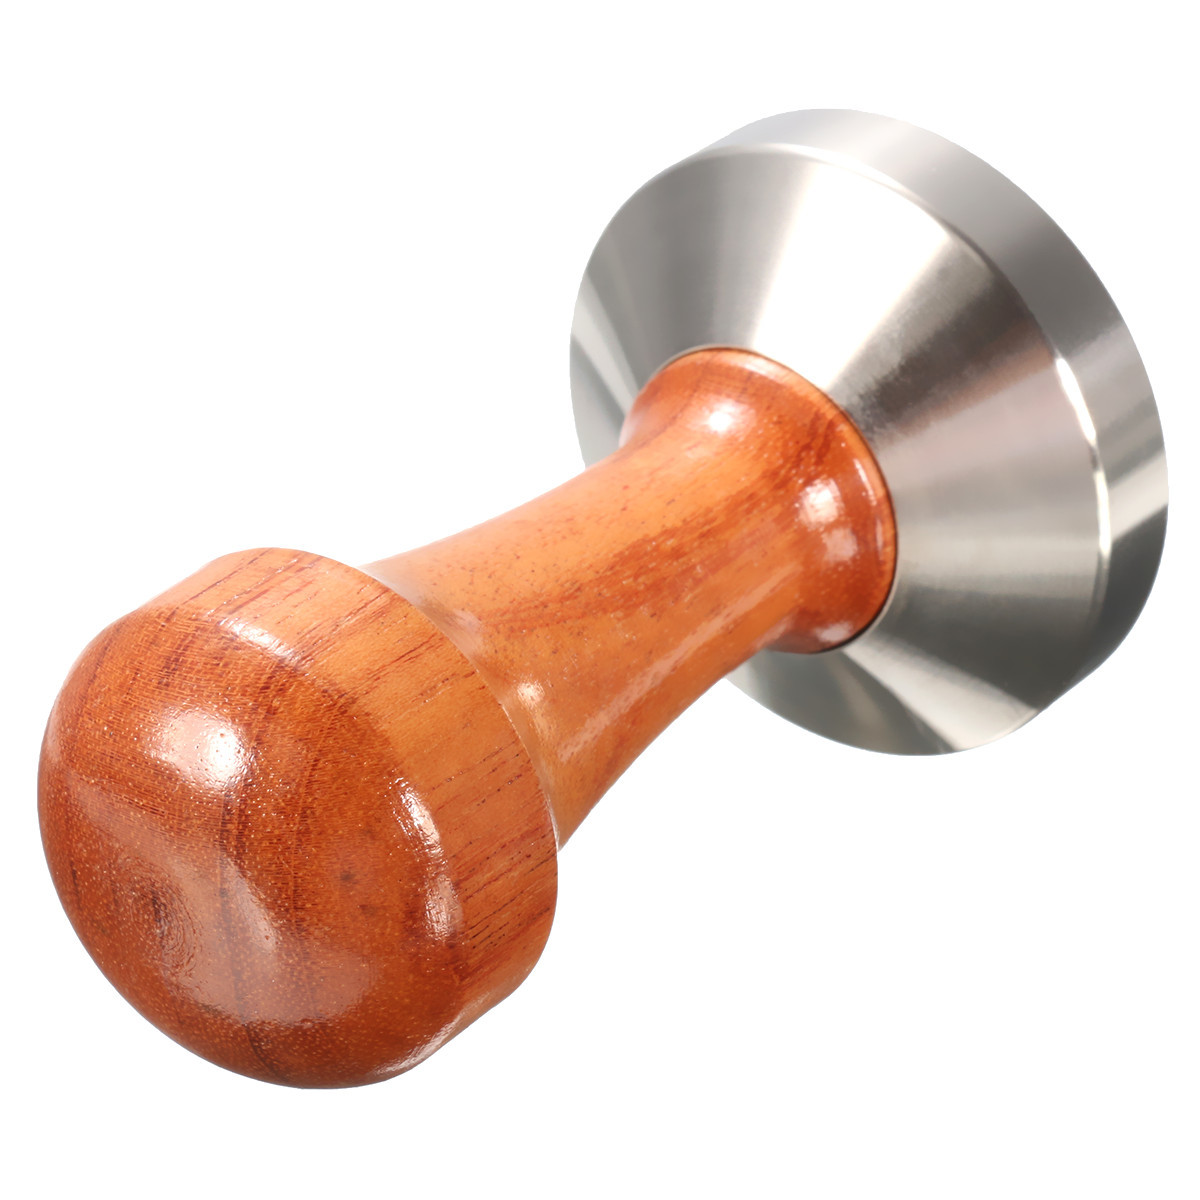 53mm-Stainless-Steel-Cafe-Coffee-Tamper-Bean-Press-for-Espresso-Flat-Base-Wooden-Handle-1170307-2